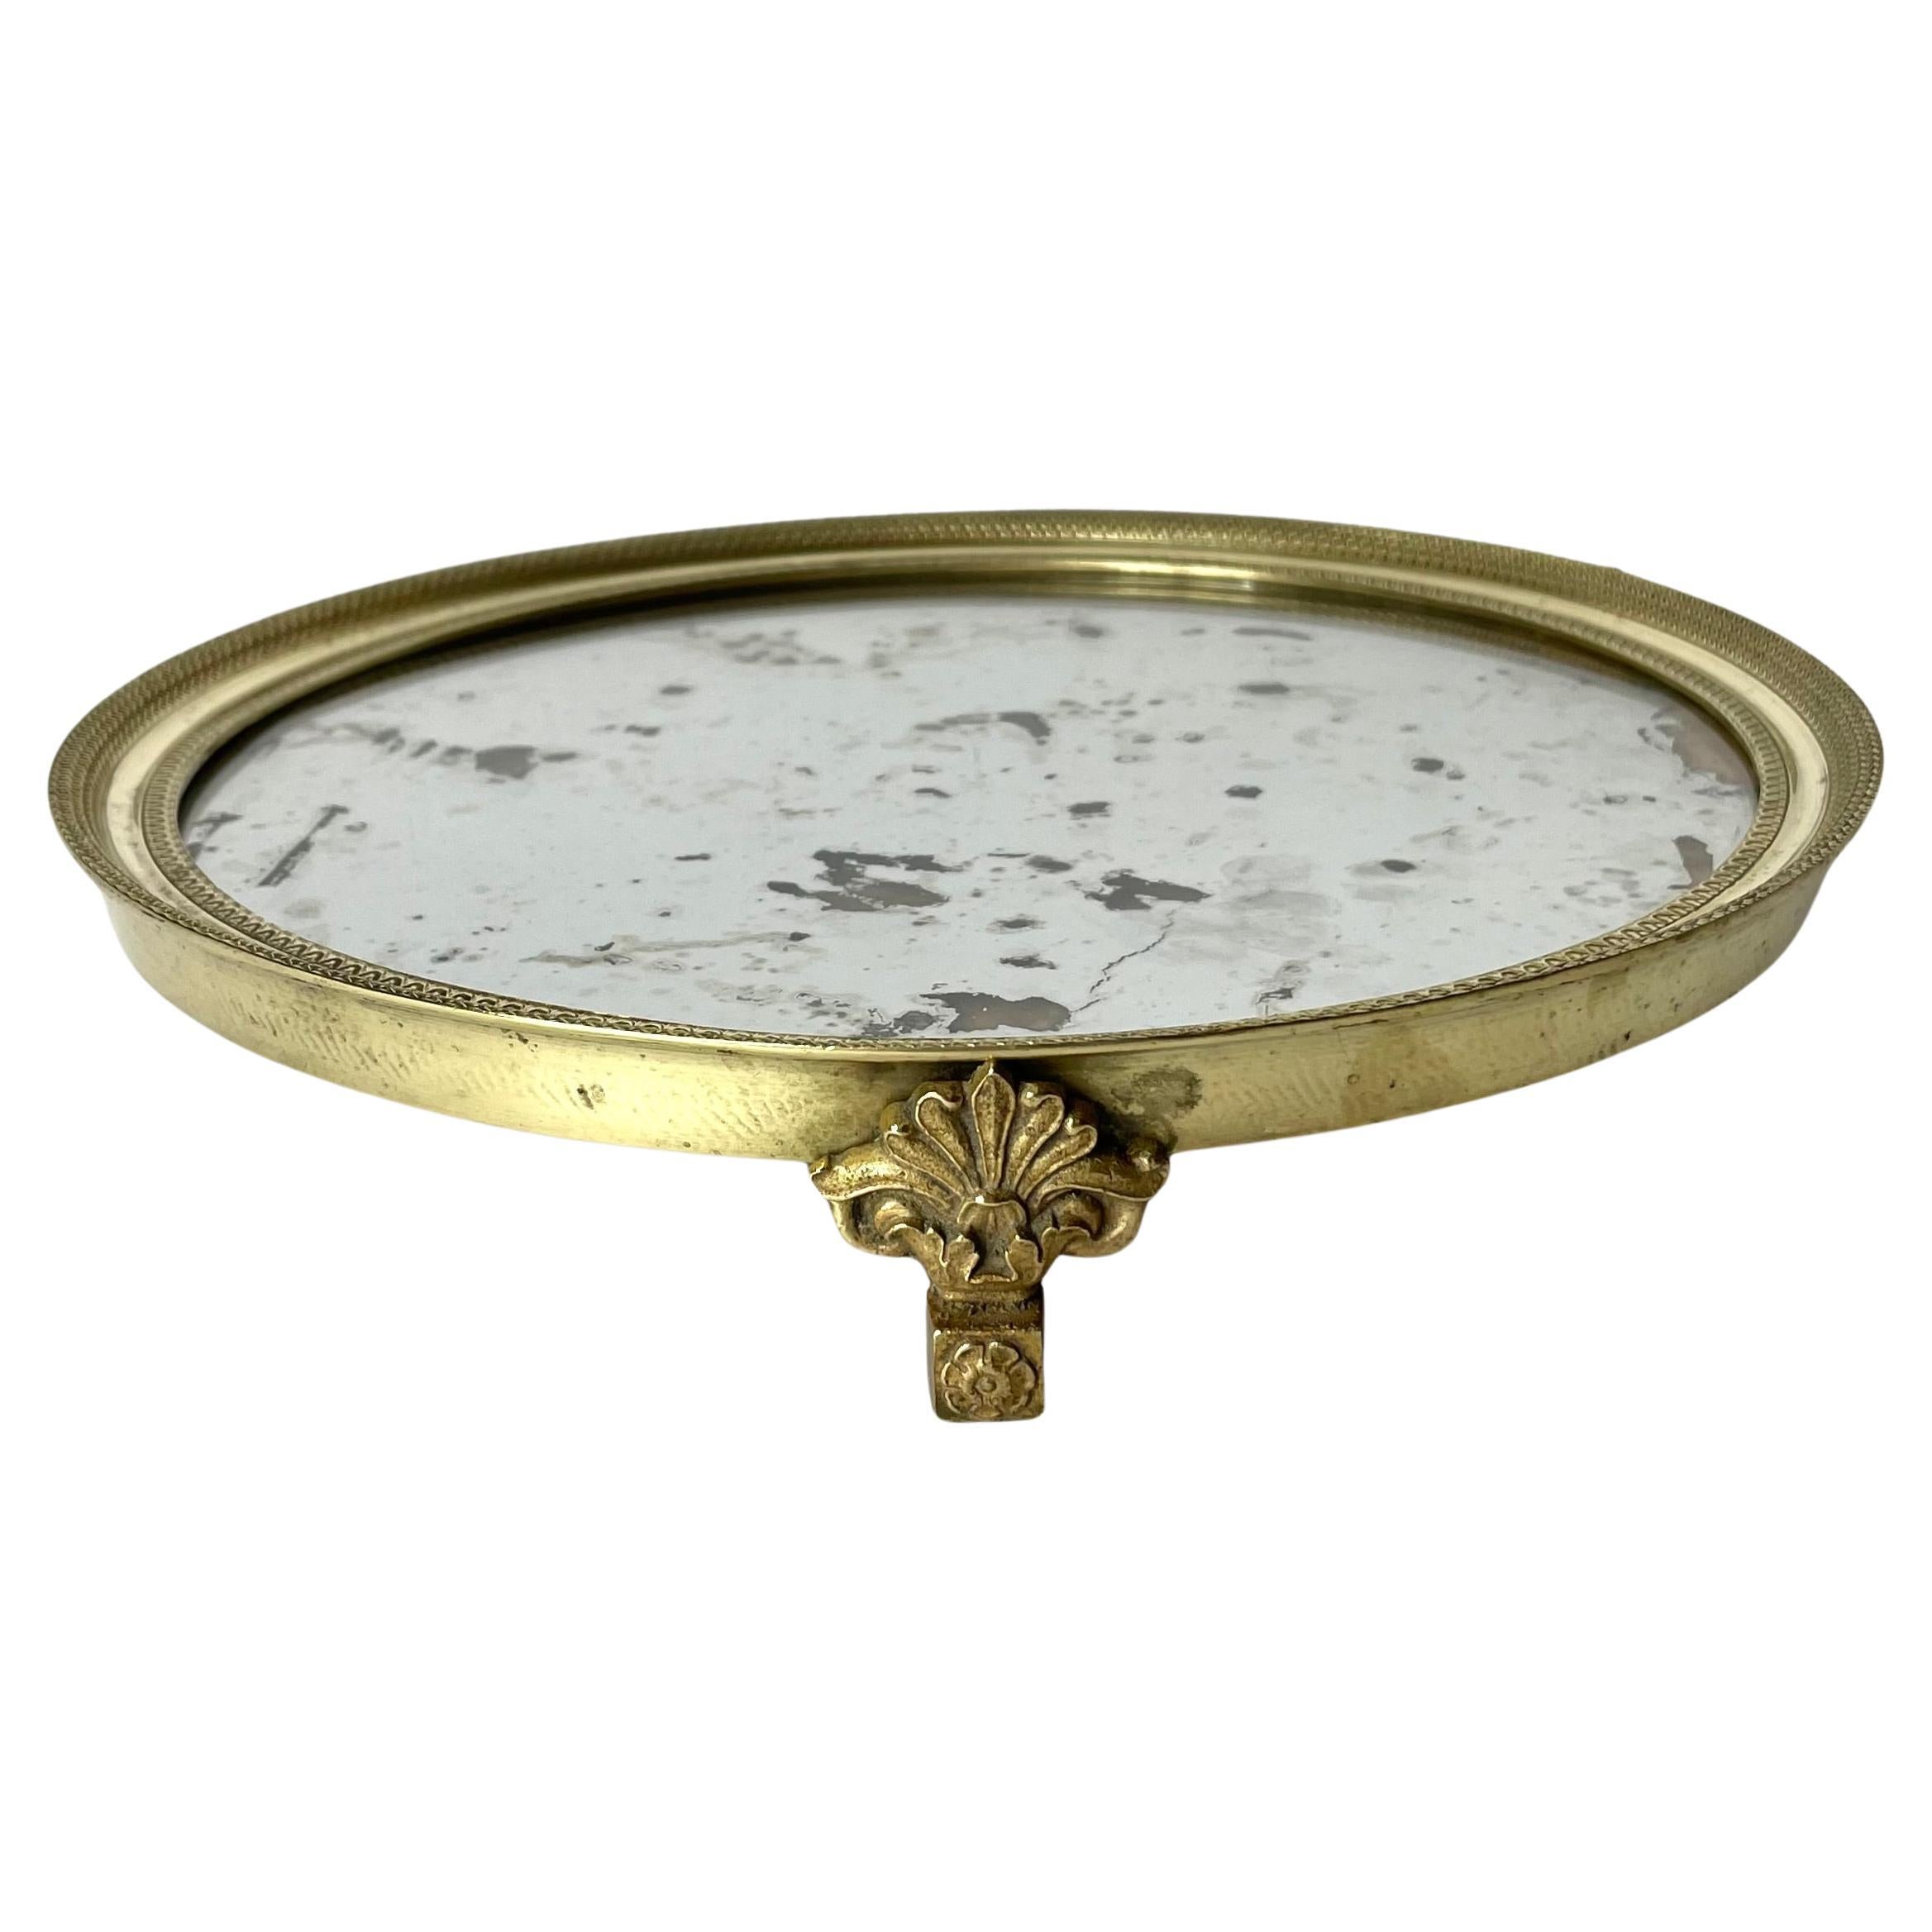 Elegant French Empire Table Plateau in Bronze with nice patina from the 1810s